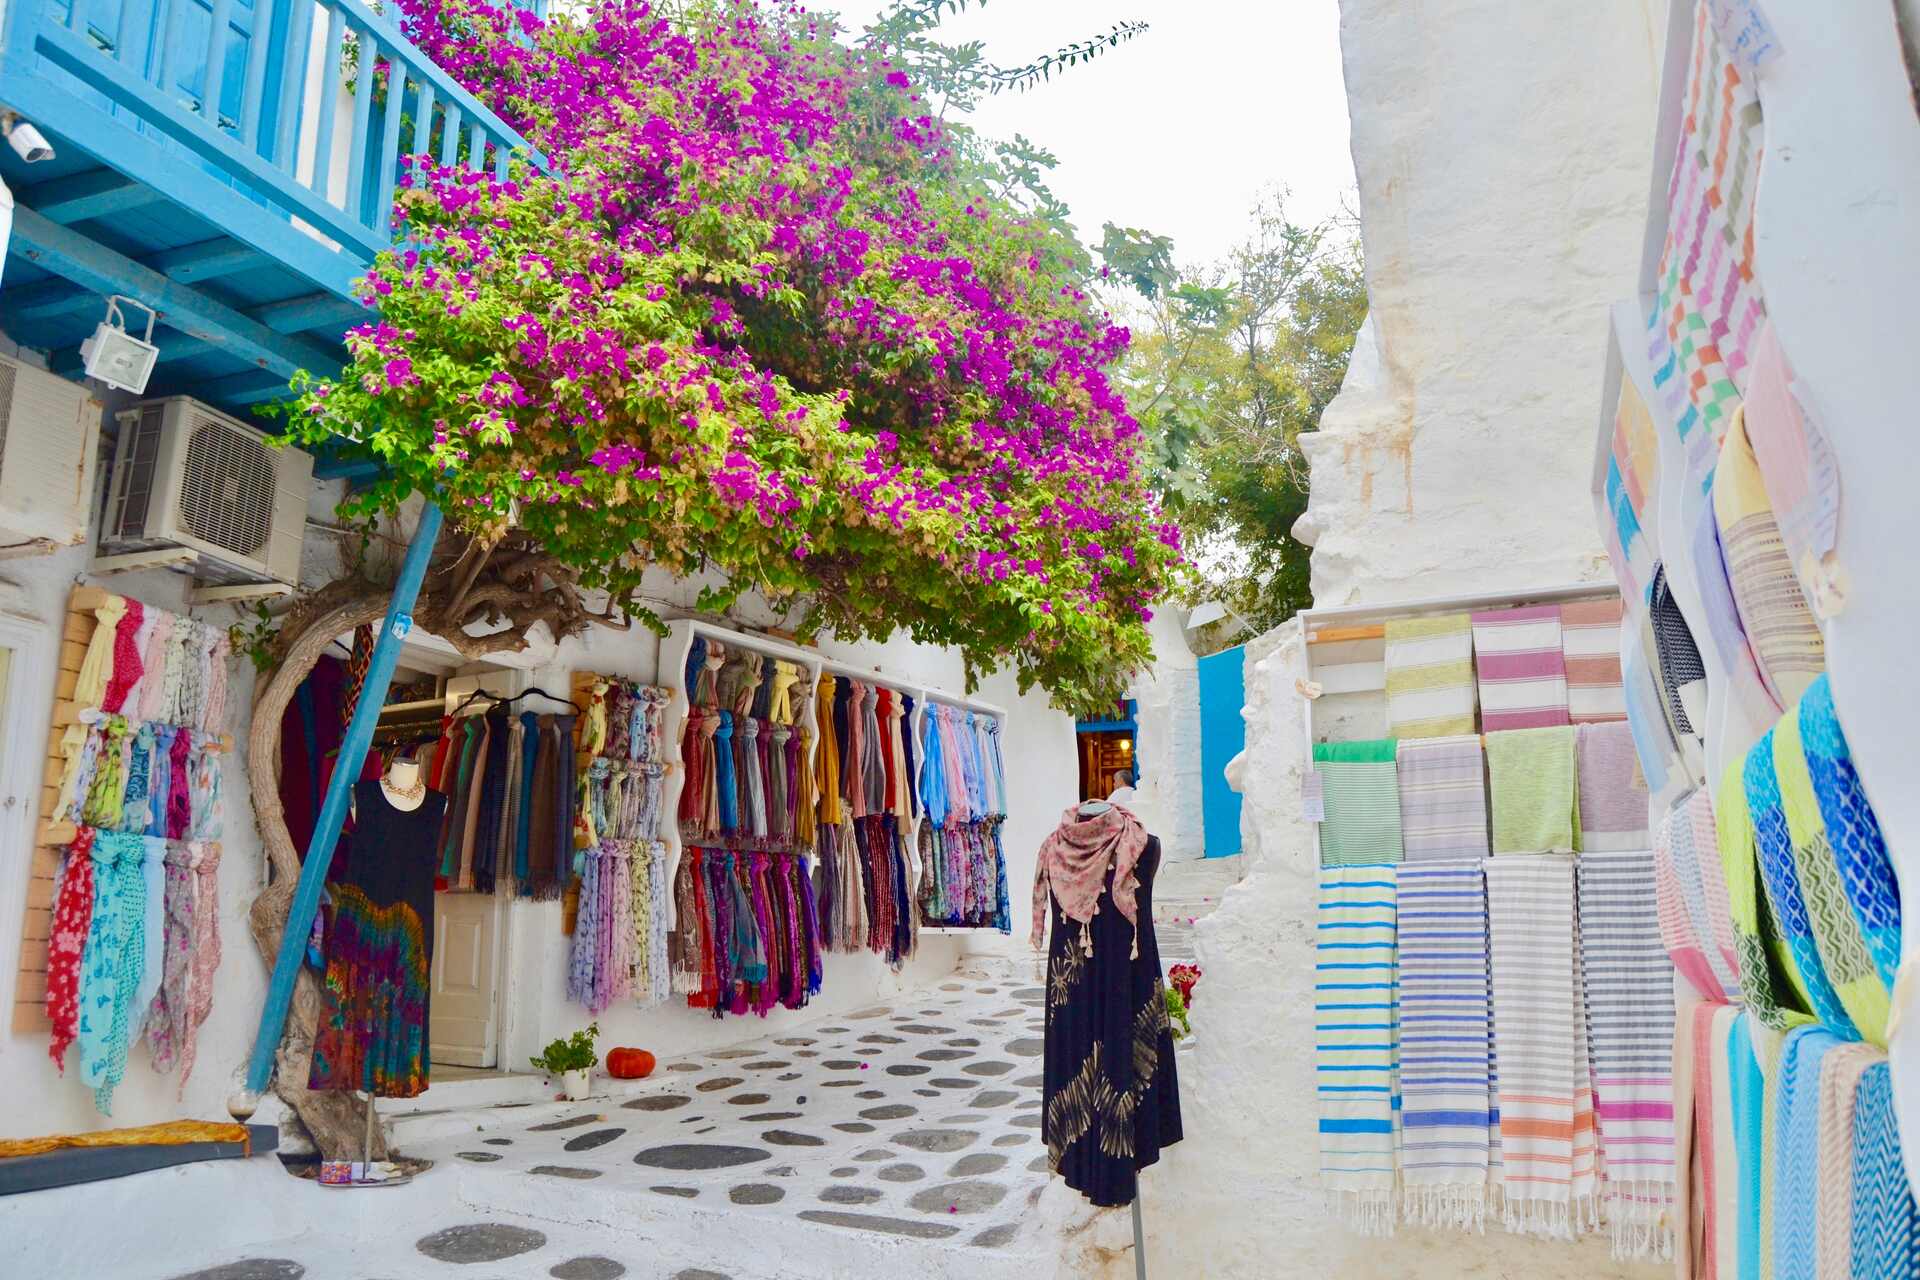 A small street in Chora